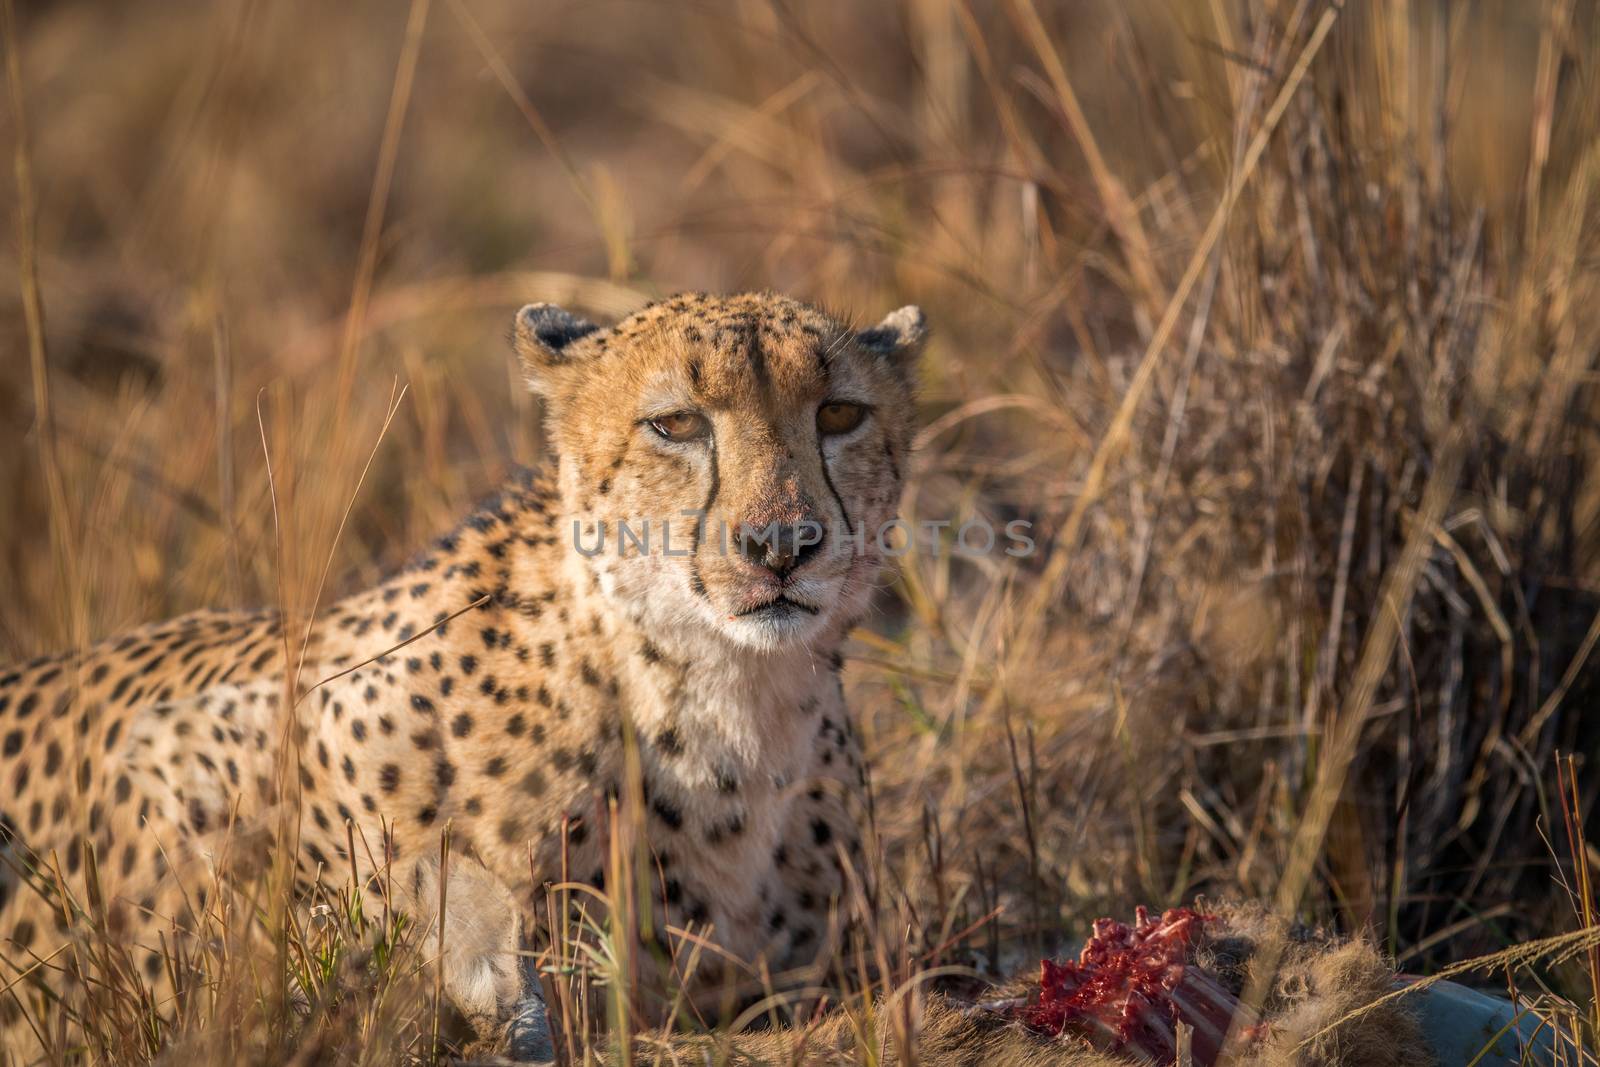 Cheetah eating from a Reedbuck carcass in the Kruger National Park, South Africa.